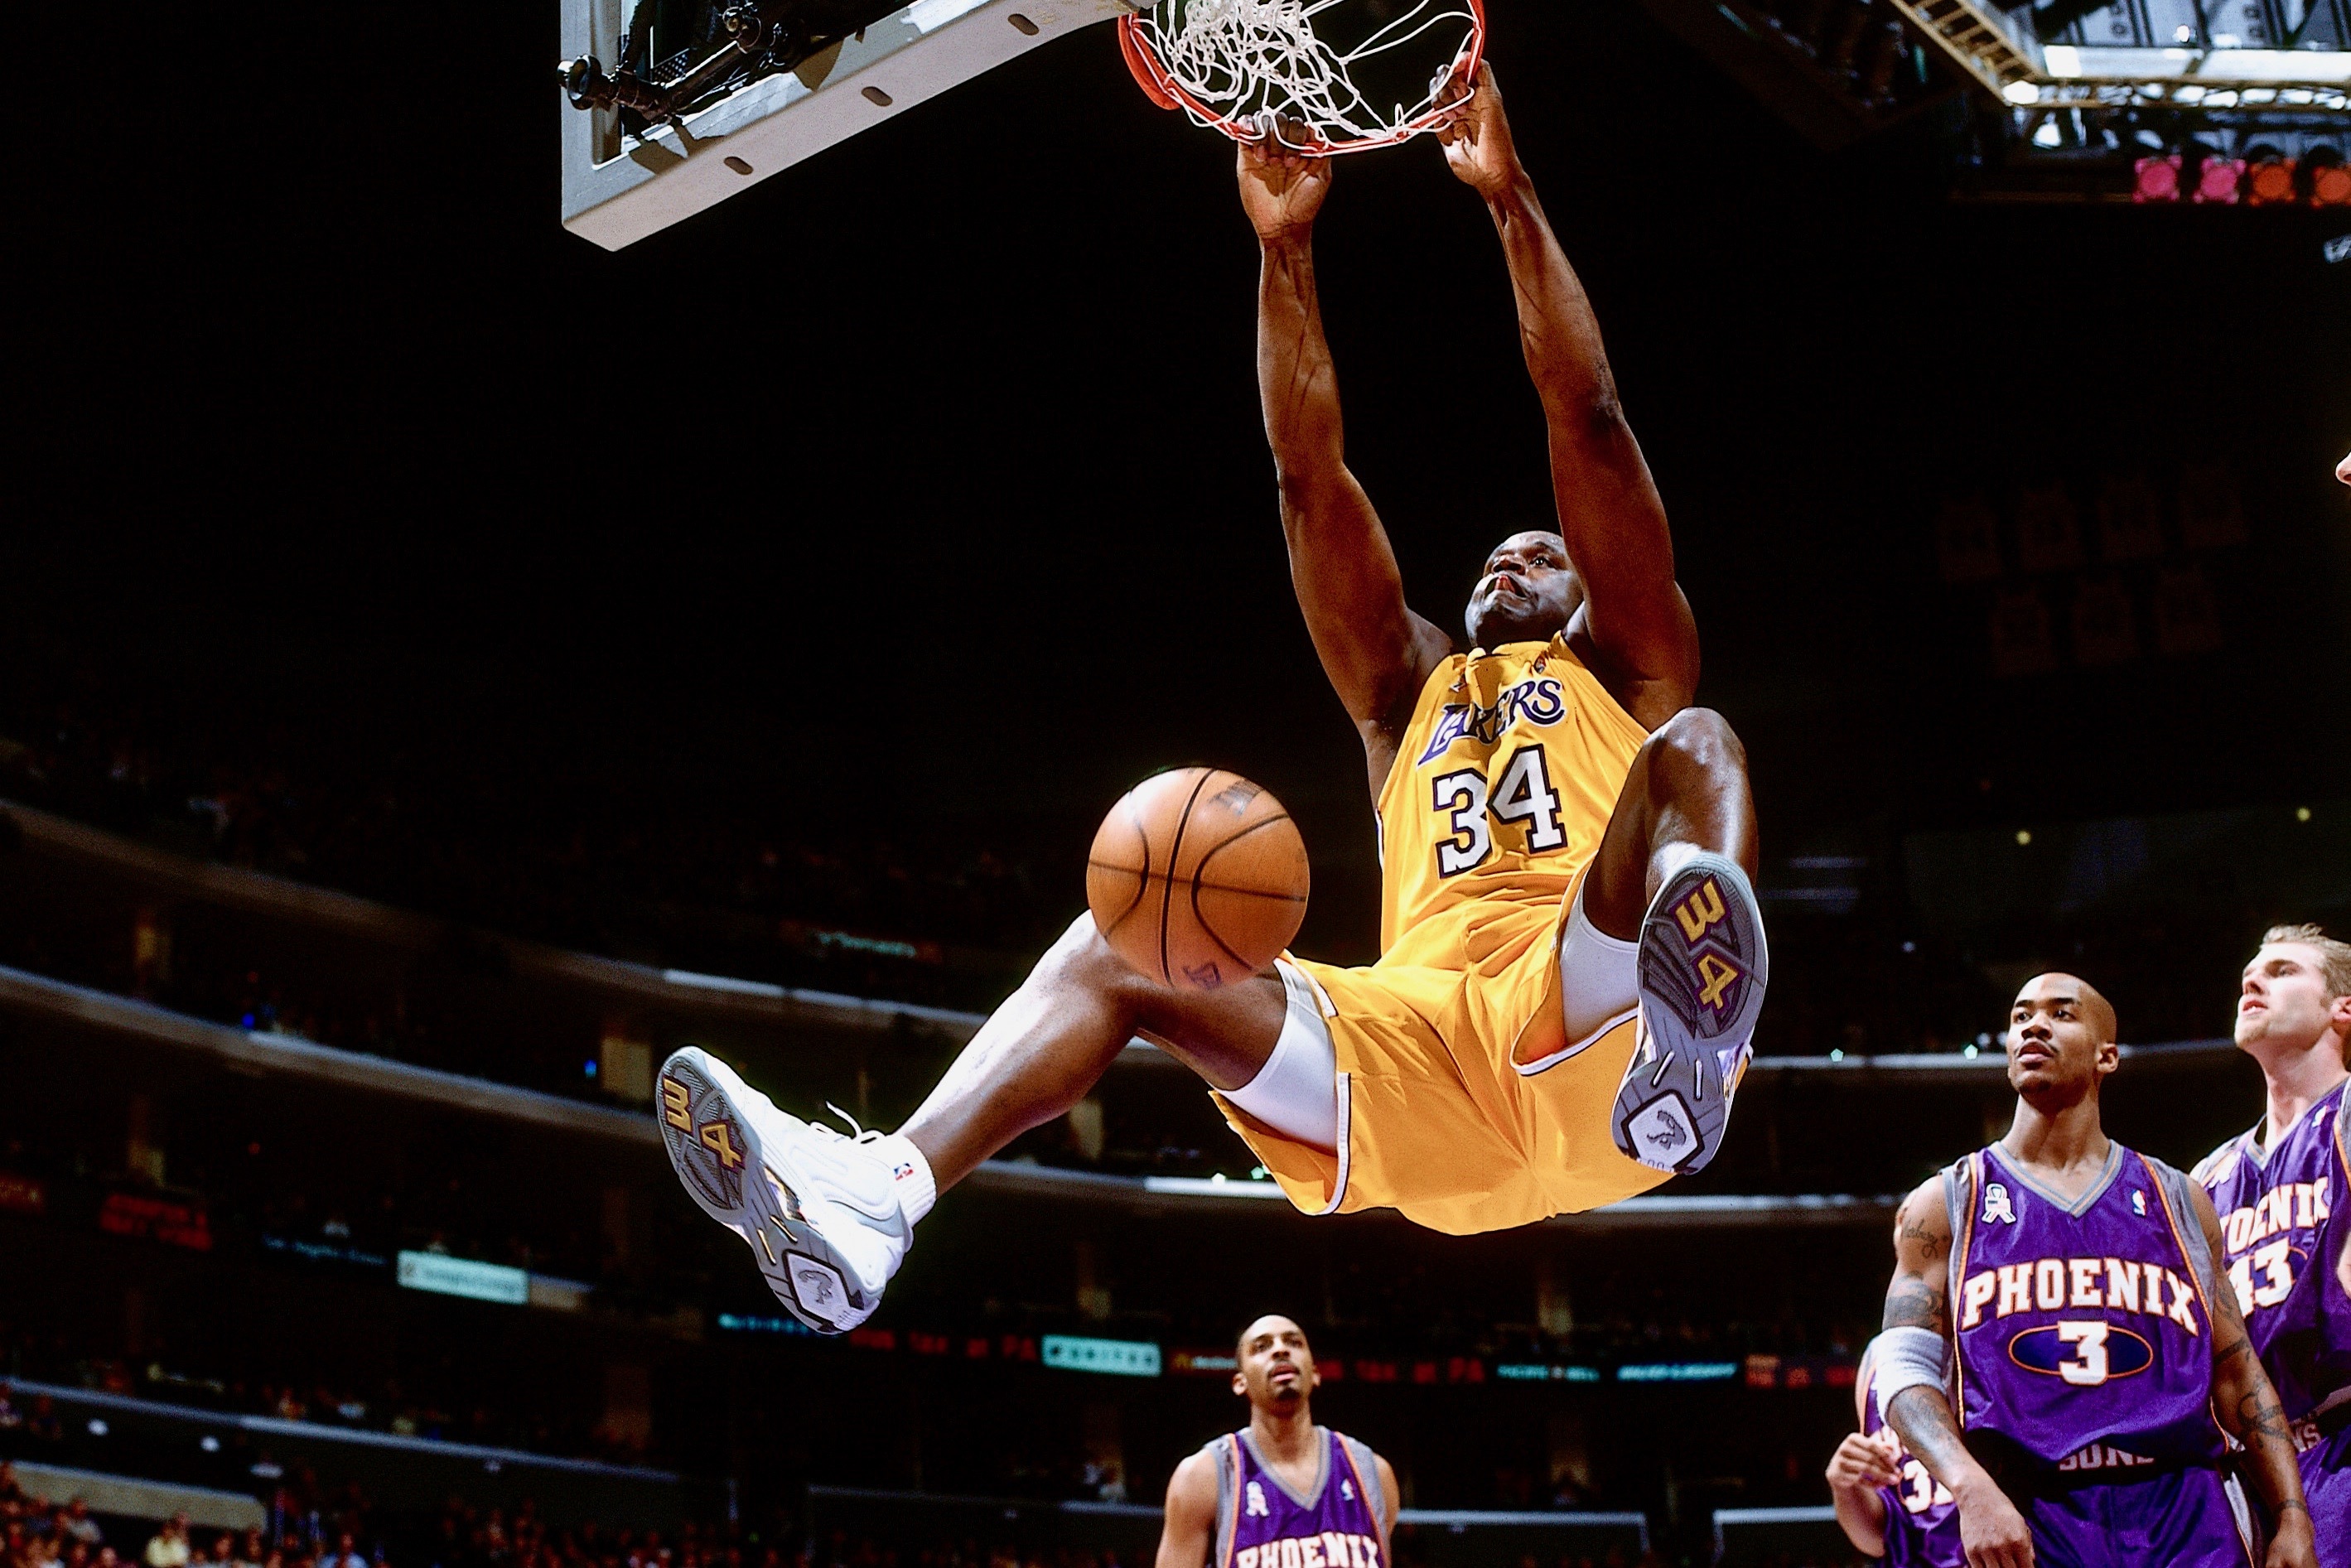 LOS ANGELES - 2004: Shaquille O'Neal #34 of the Los Angeles Lakers dunks against the Phoenix Suns during an NBA game circa 2004 at the Staples Center in Los Angeles, California. NOTE TO USER: User expressly acknowledges and agrees that, by downloading and/or using this Photograph, User is consenting to the terms and conditions of the Getty Images License Agreement. Mandatory Copyright Notice: Copyright 2004 NBAE (Photo by Andrew D. Bernstein/NBAE via Getty Images)